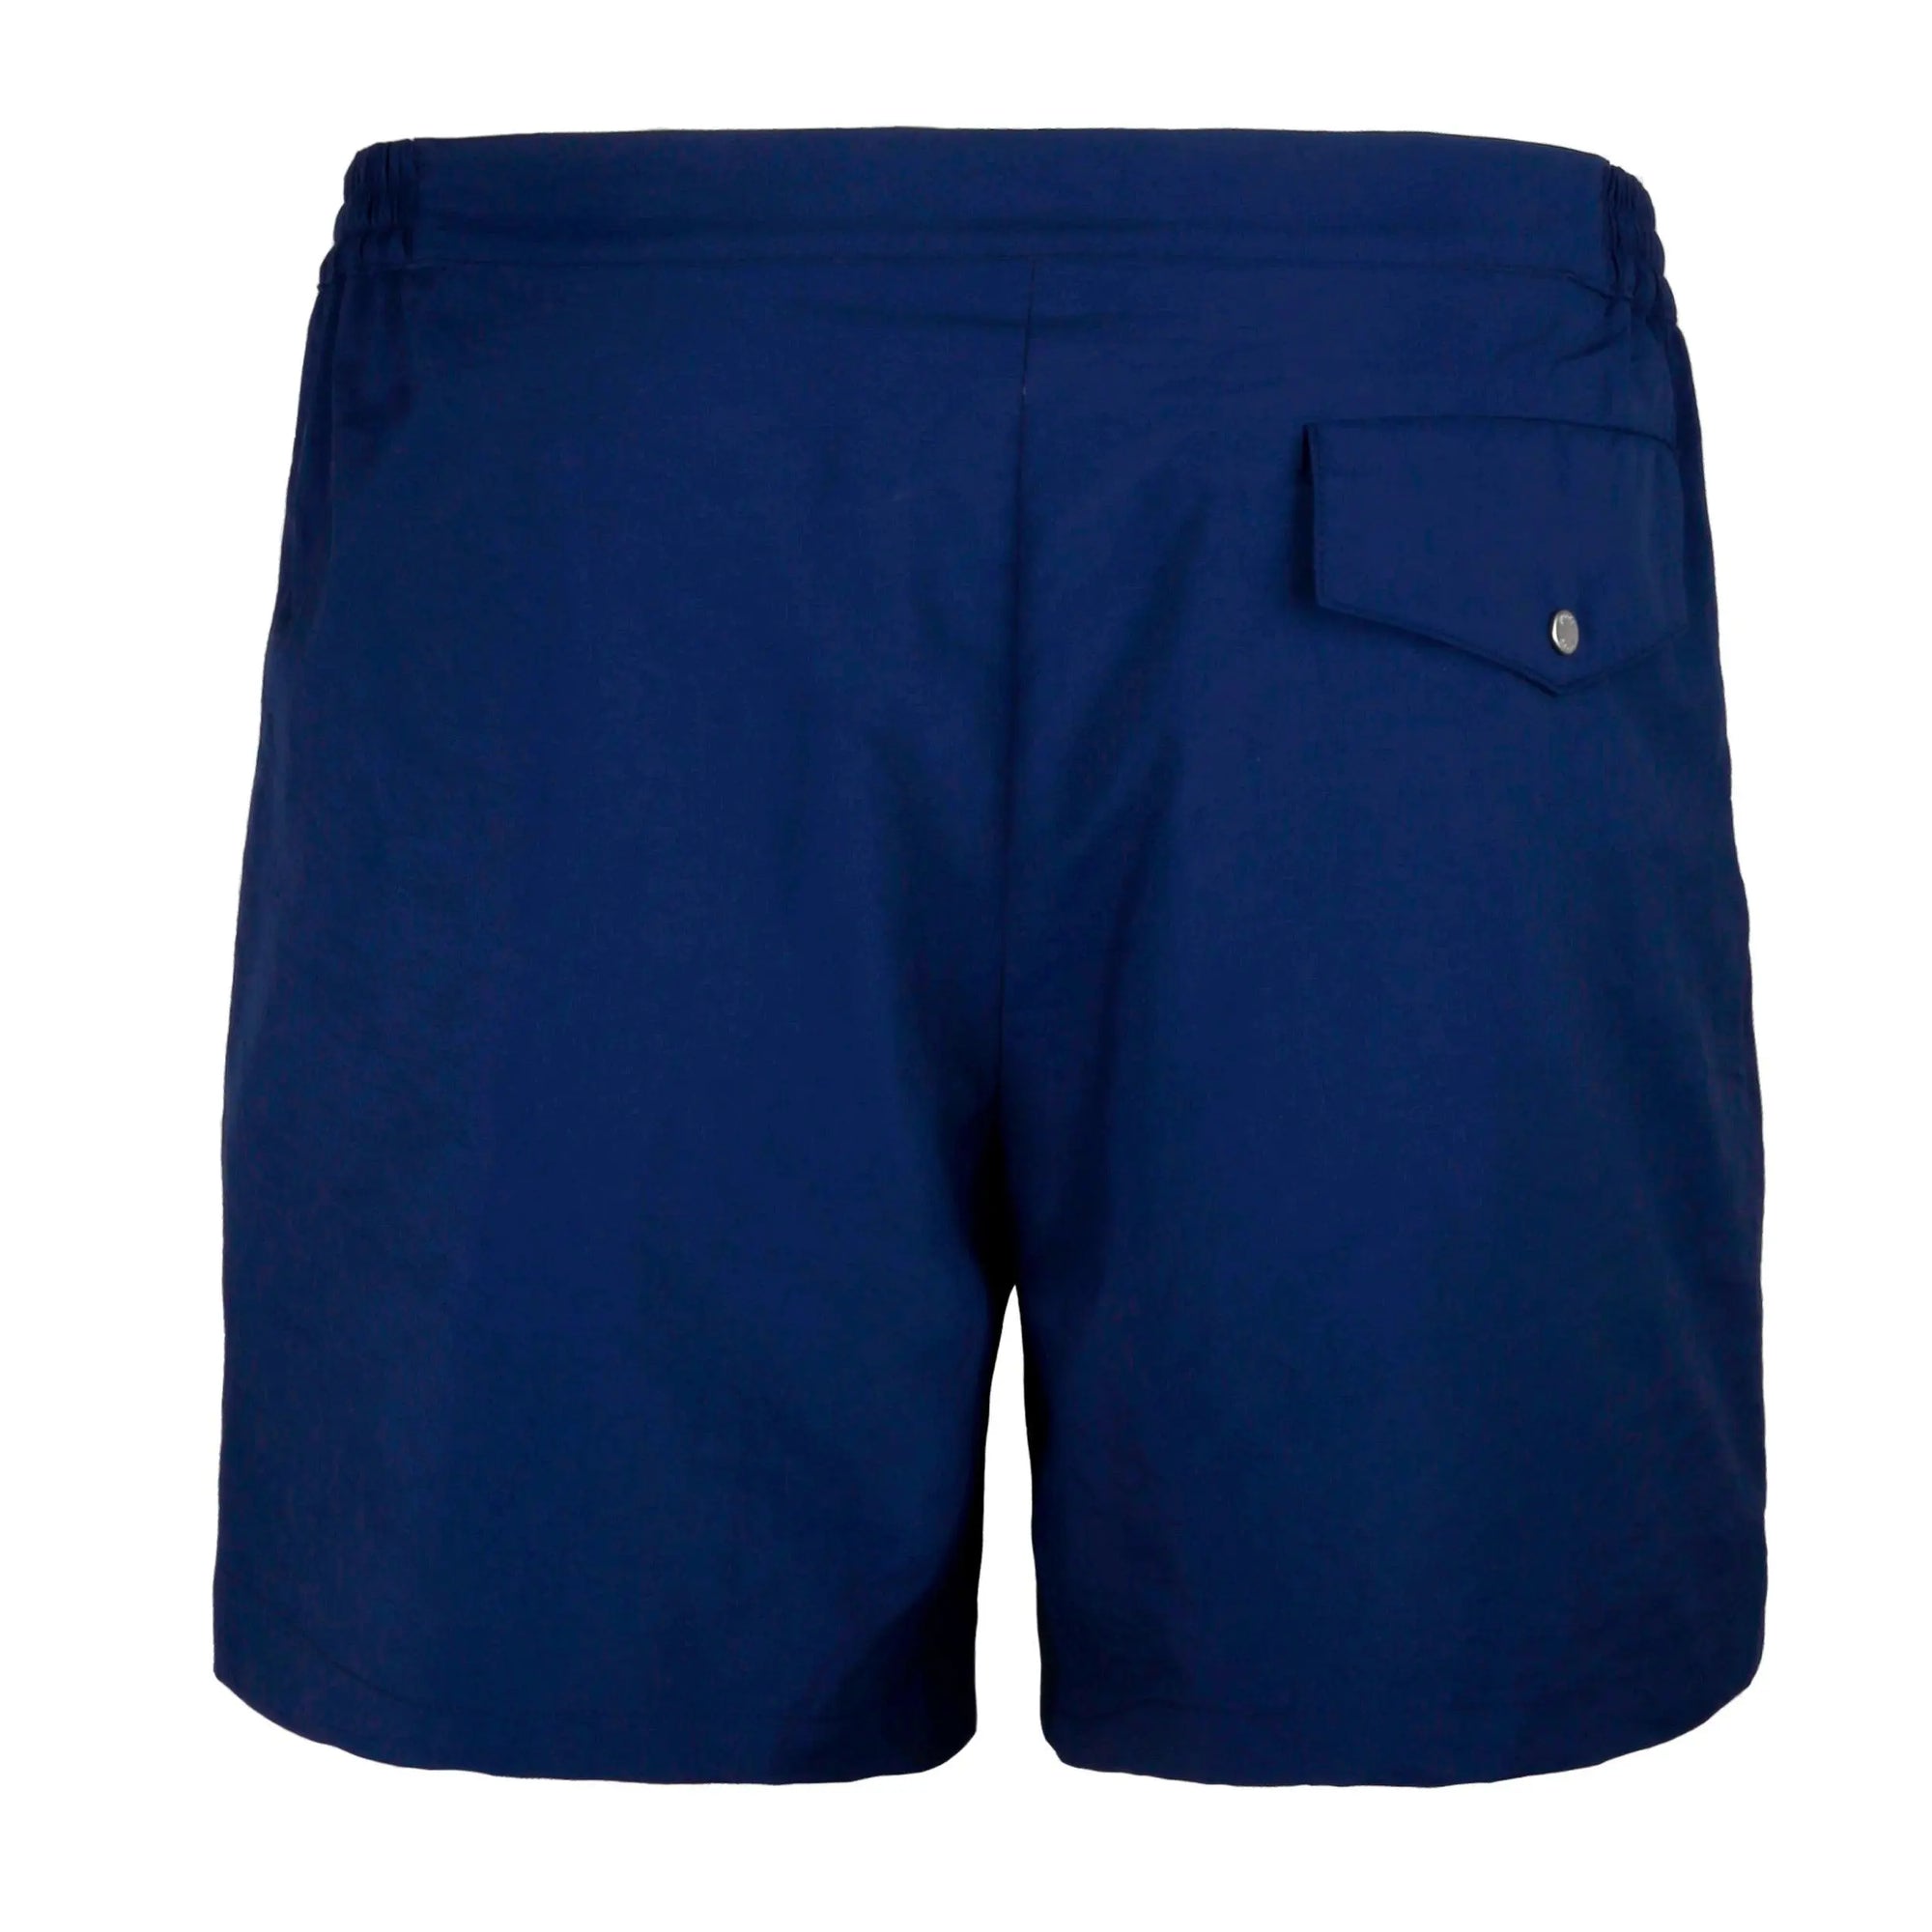 A neatly folded dark blue bermuda swimwear is placed in a white box with a brown interior. The box lid, slightly off to the side, and a tag on the swimwear both feature the brand name "Bassal." A small plastic packet is attached to the tag. Discover this elegant piece exclusively at BassalStore, your go-to for Barcelona style.